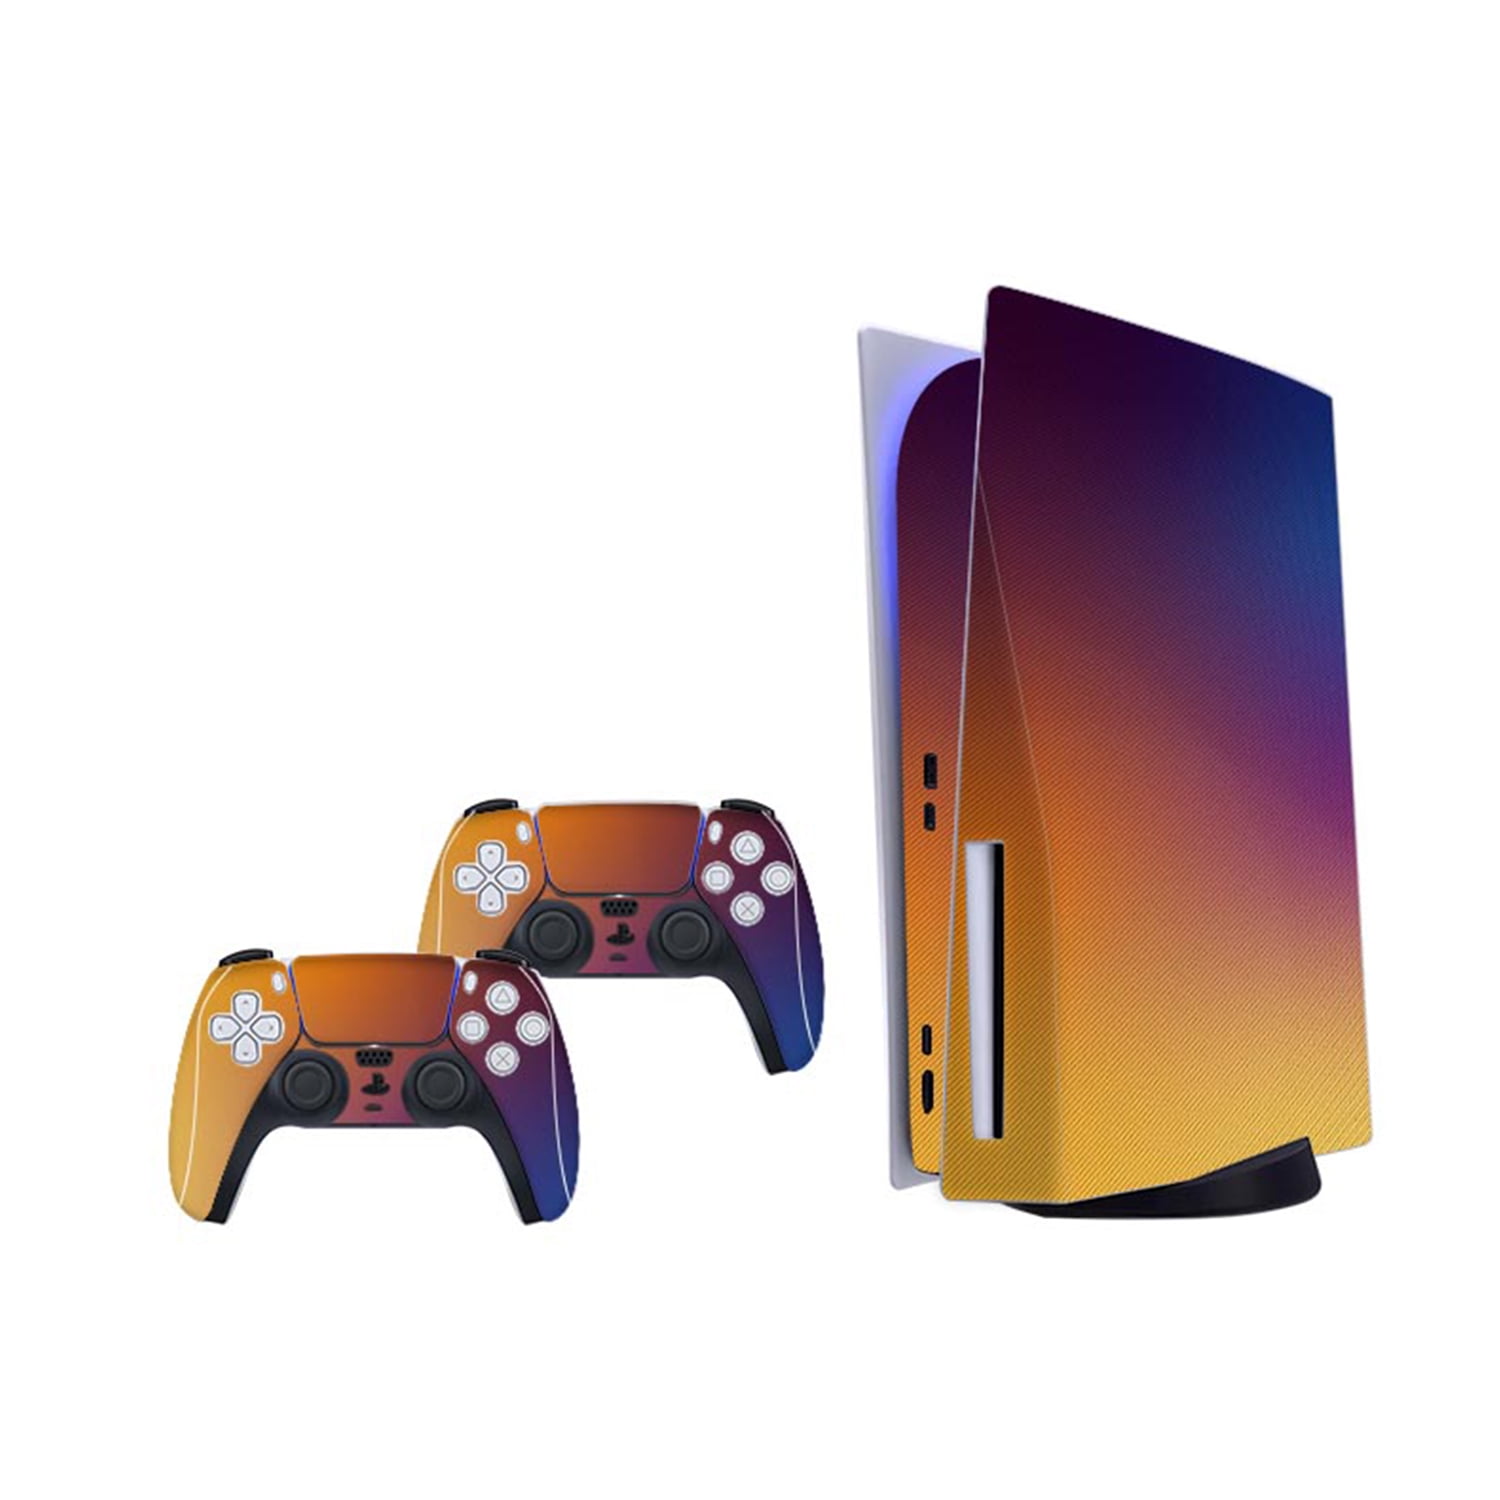 Mytrix PS5 Skin for Playstation 5 Disc Version Console Controllers, Durable  Protective Skin Stickers for Playstation 5 PS5 Disk Console Controllers,  Vinyl Decal Style Stickers - Orange-Purple Fade 